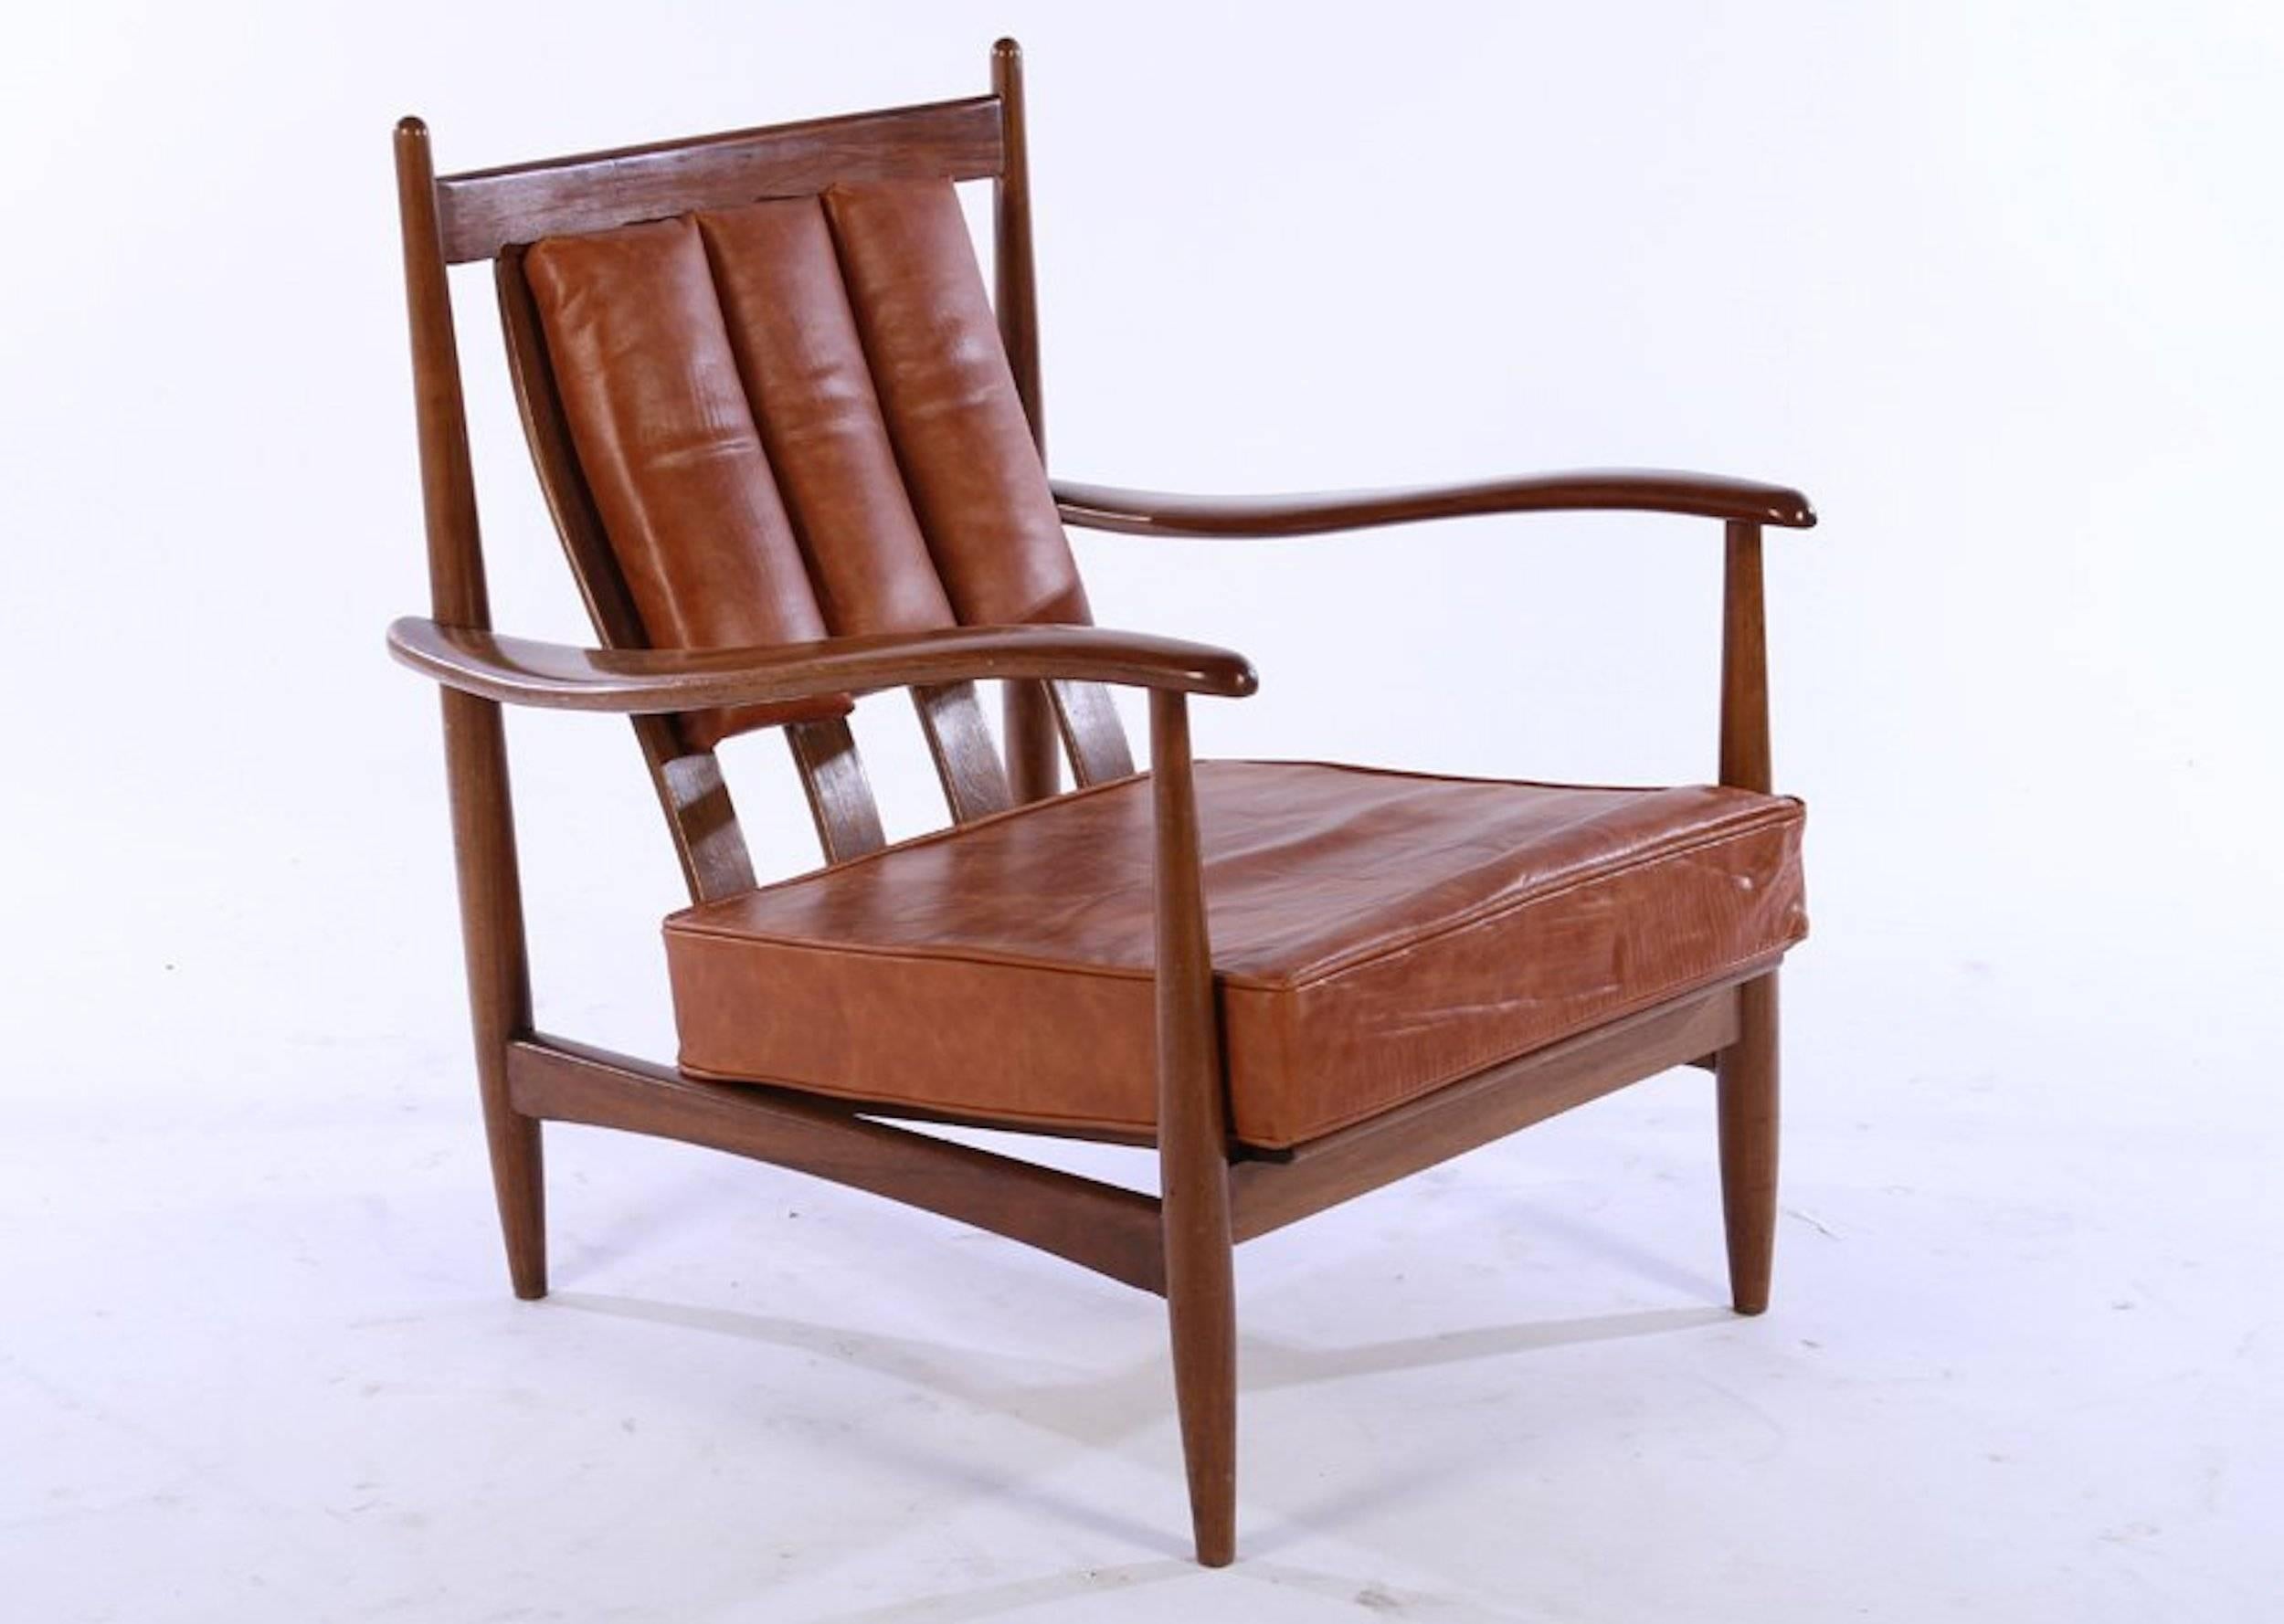 A pair of Danish channeled leather lounge chairs with walnut frames and loose seat cushions, circa 1960. 

Dimensions: 32